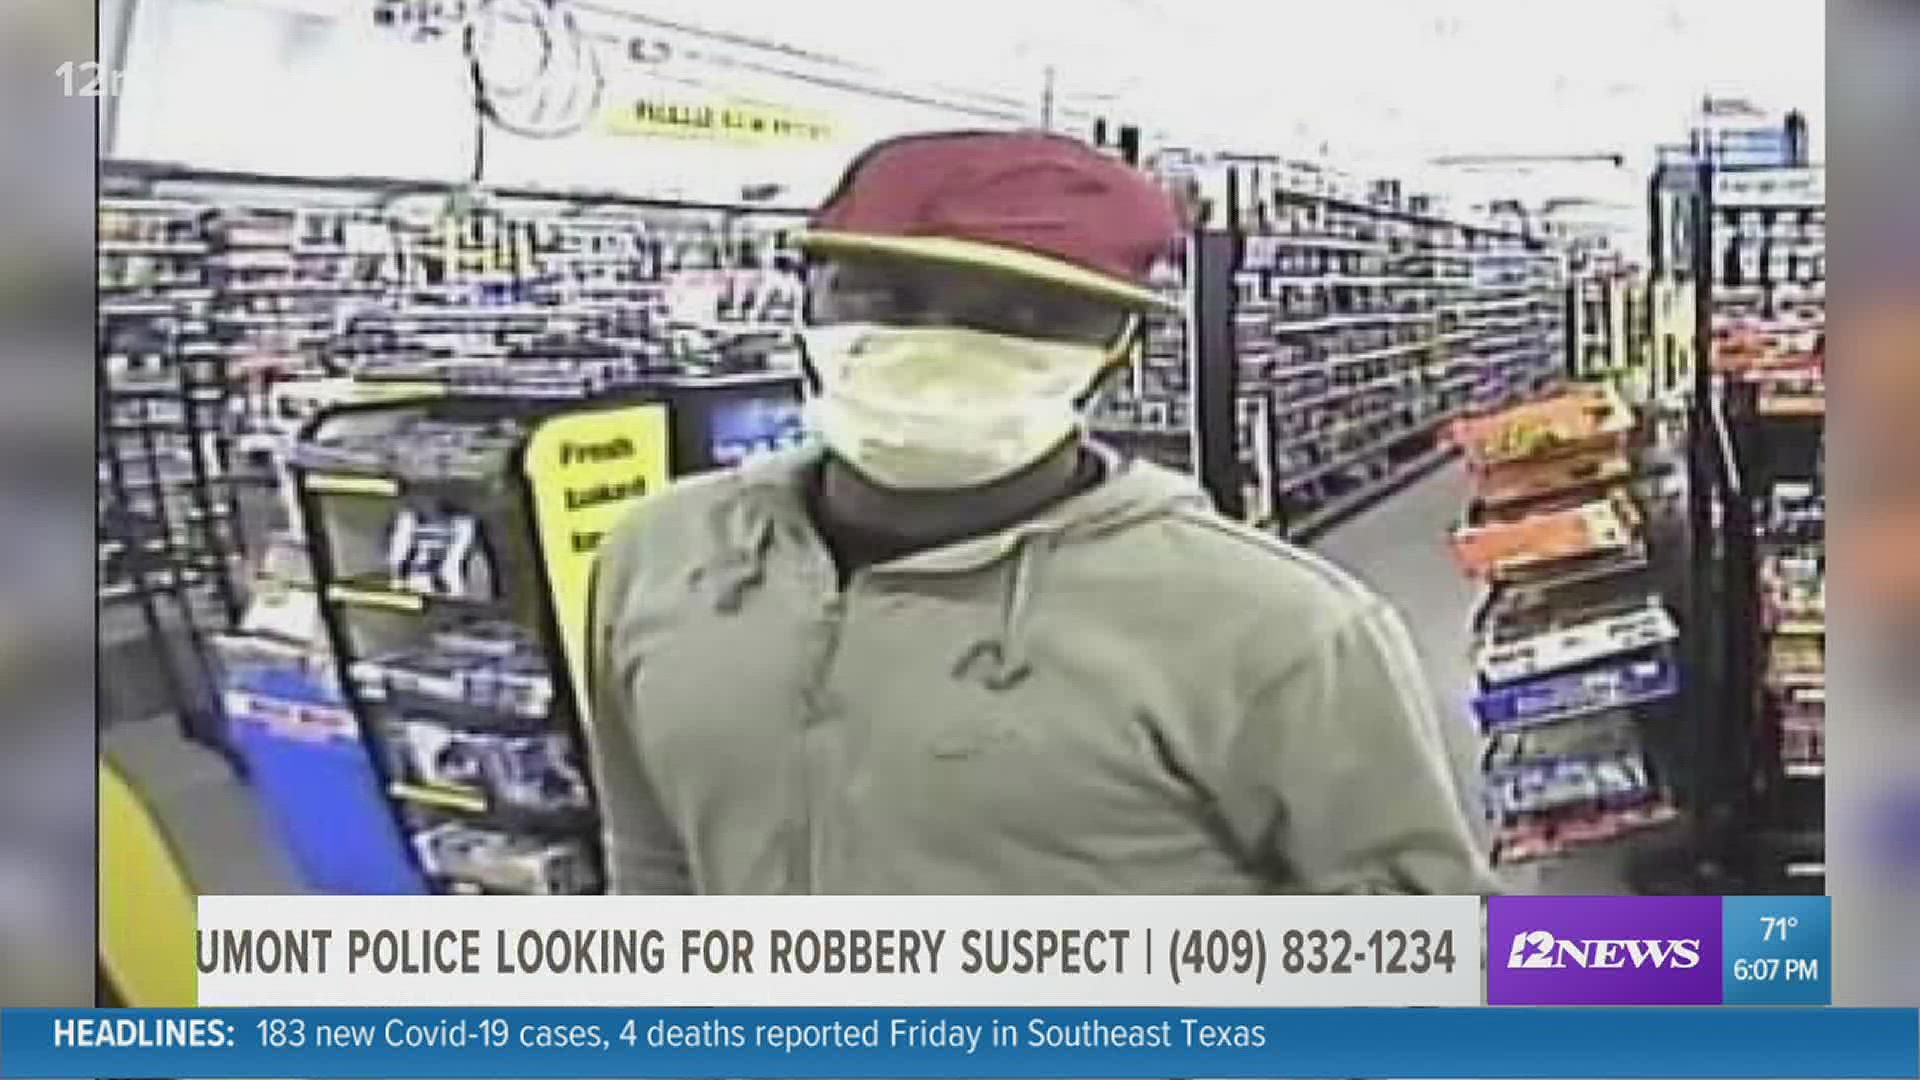 Police still looking for help with Friday robbery case